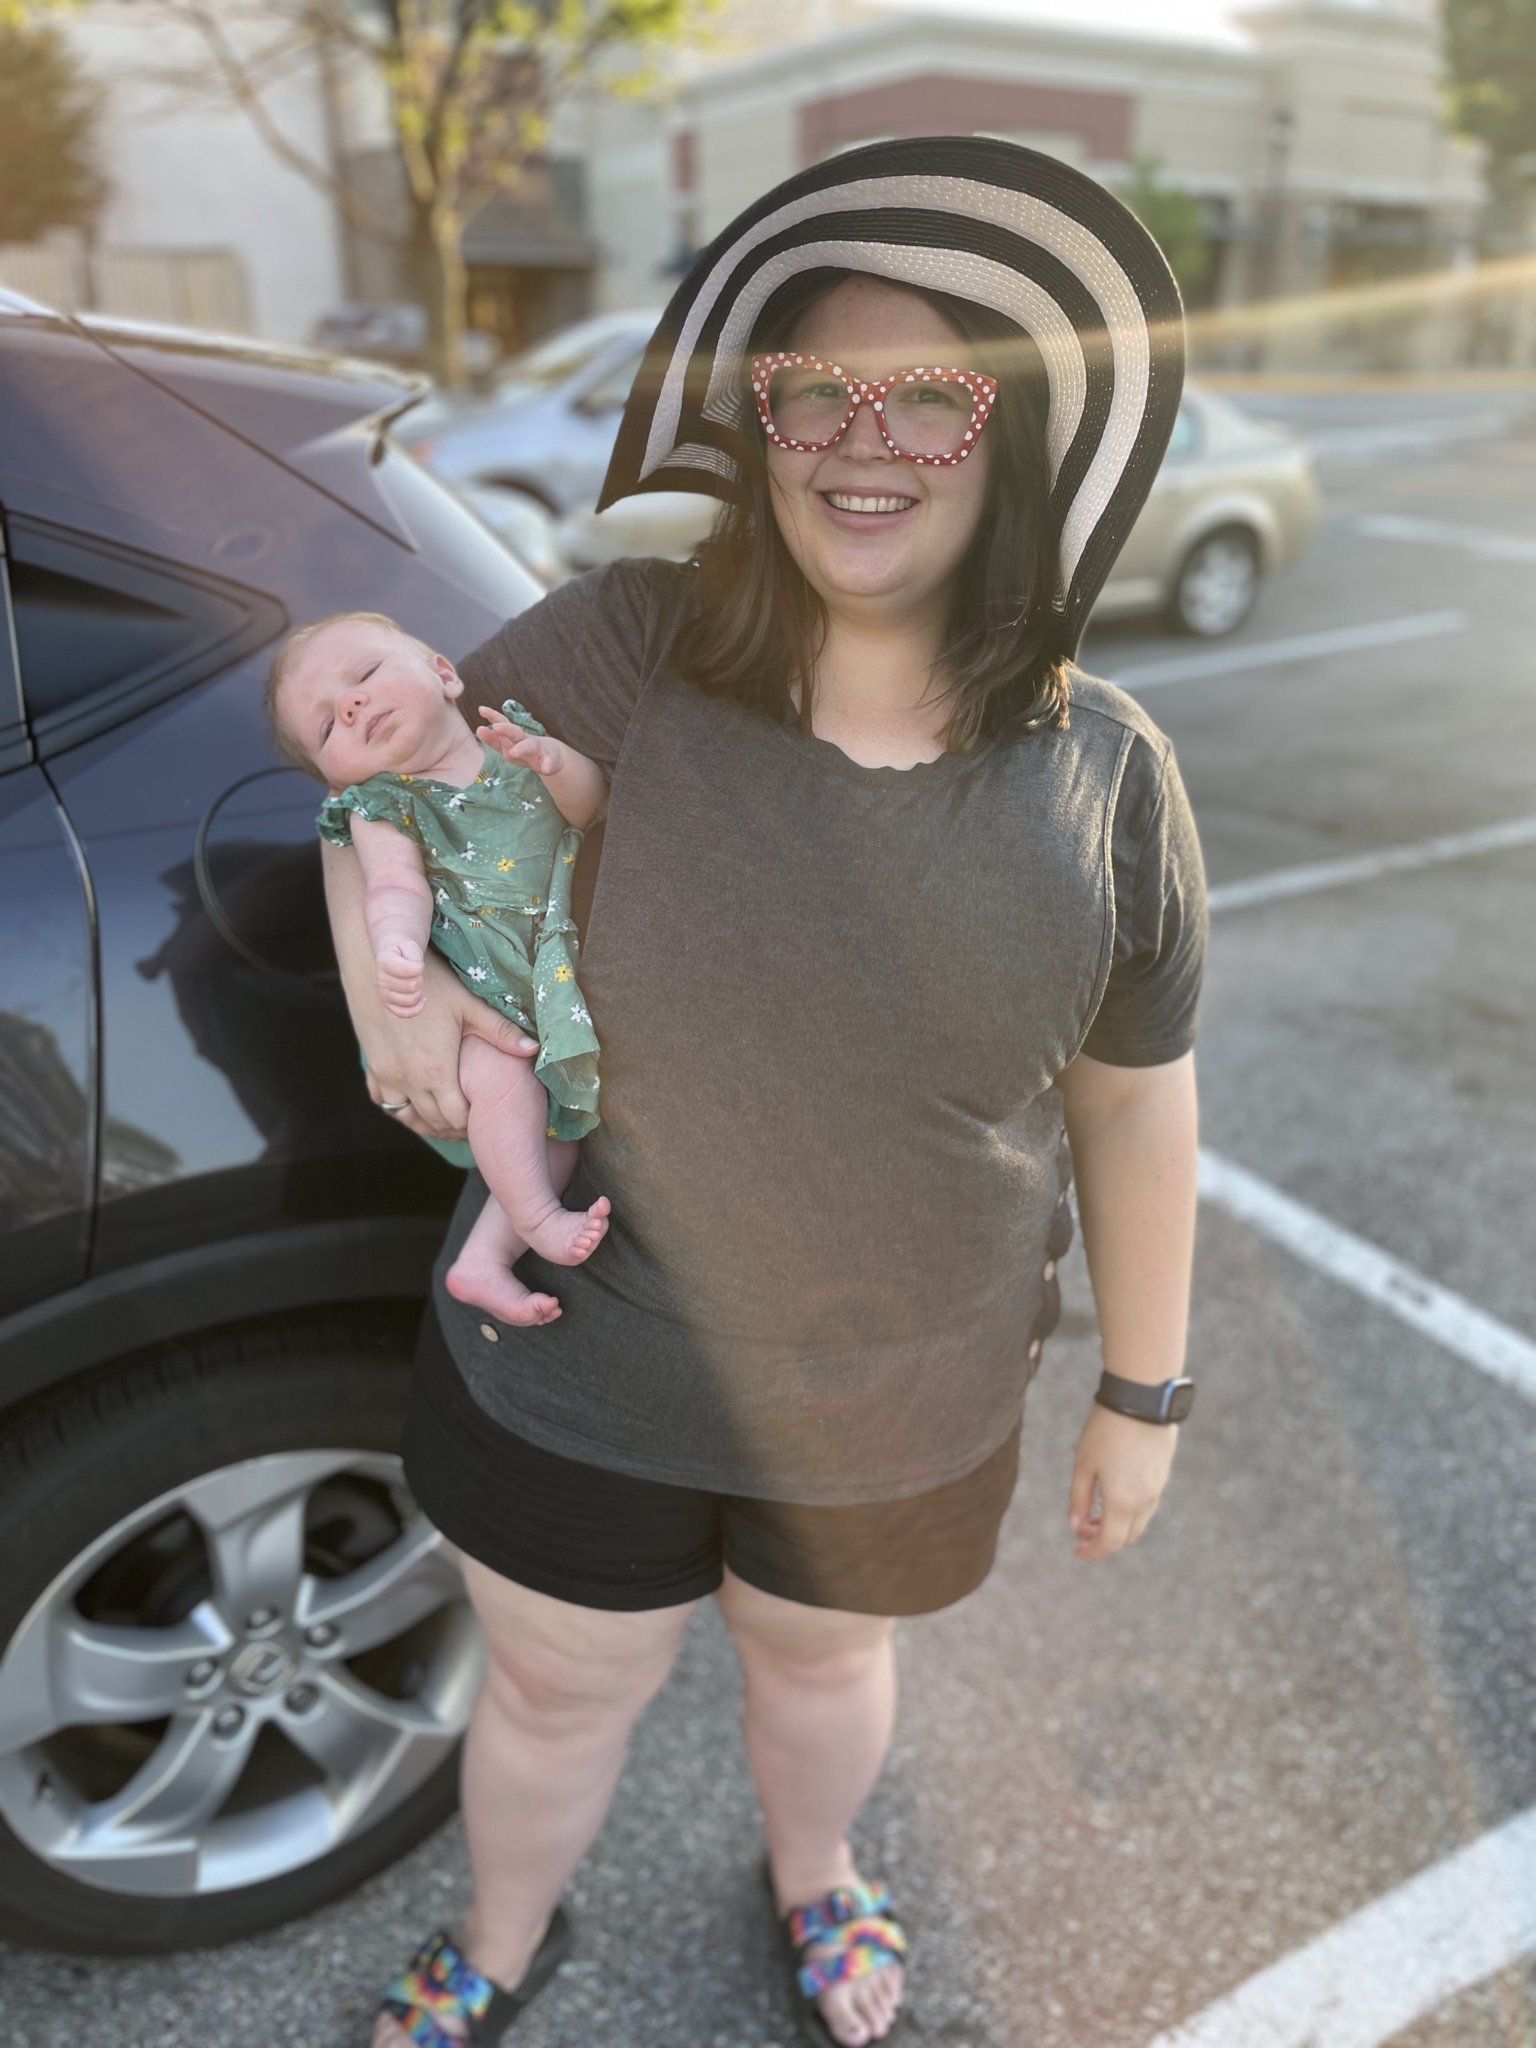 Me holding my baby daughter Shara while wearing a black and white floppy hat, gray shirt, and black shorts.